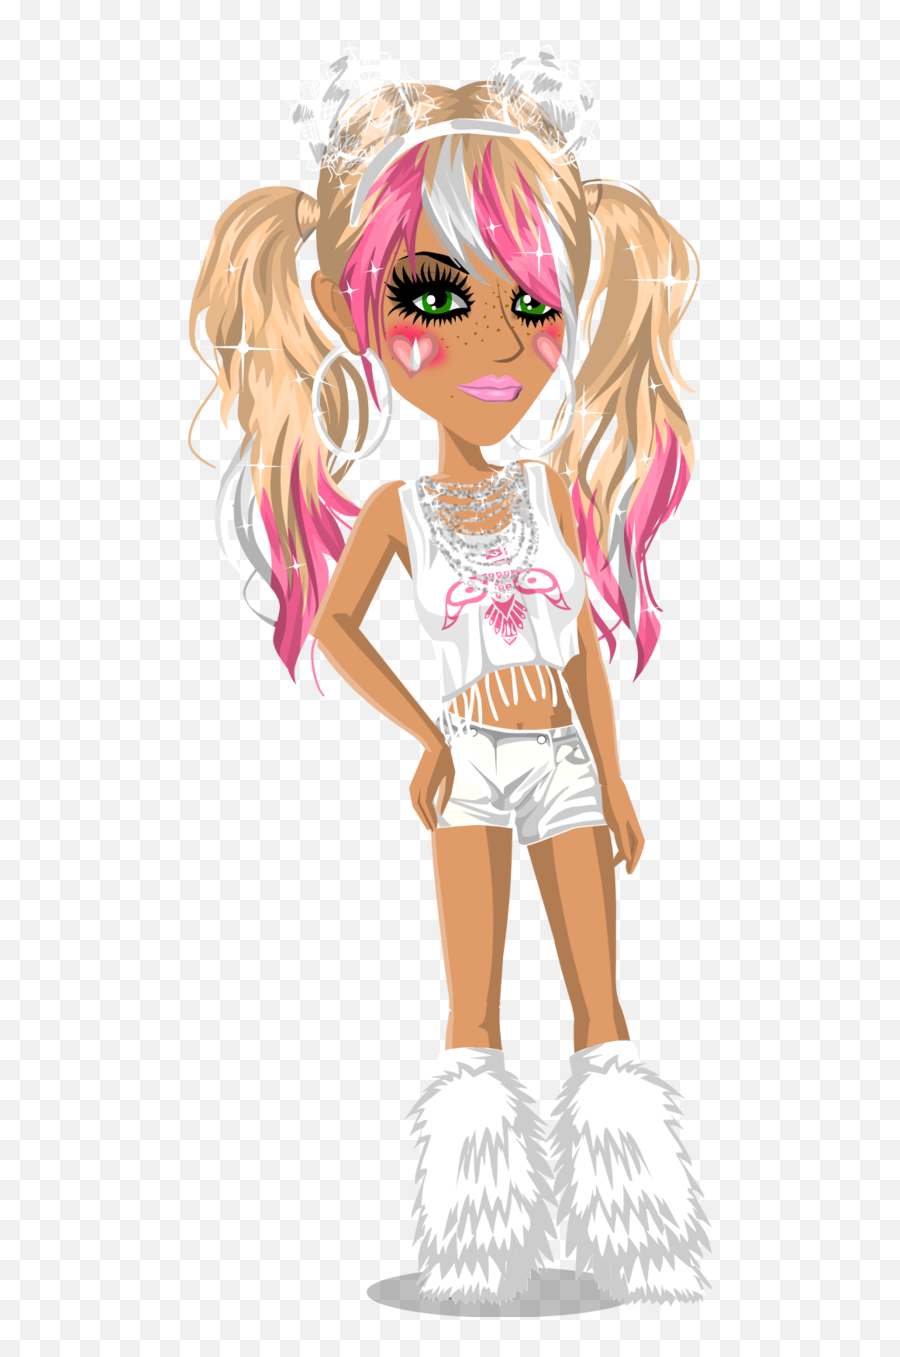 Image In Moviestarplanet Collection By Maria - Msp Look 2014 Png,Moviestarplanet Logo